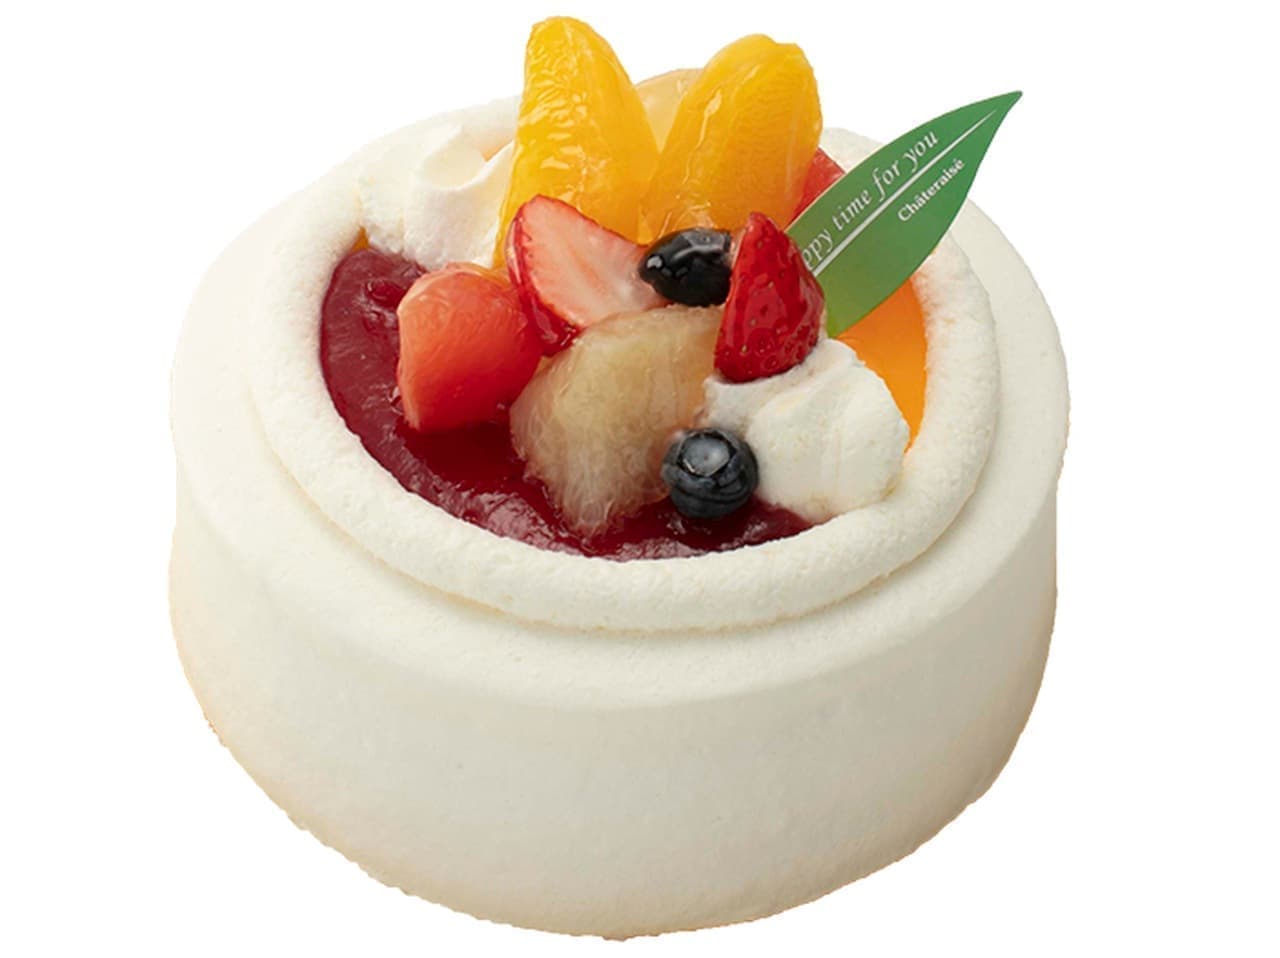 Chateraise "Strawberry and Citrus Souffle Cheese Decoration"